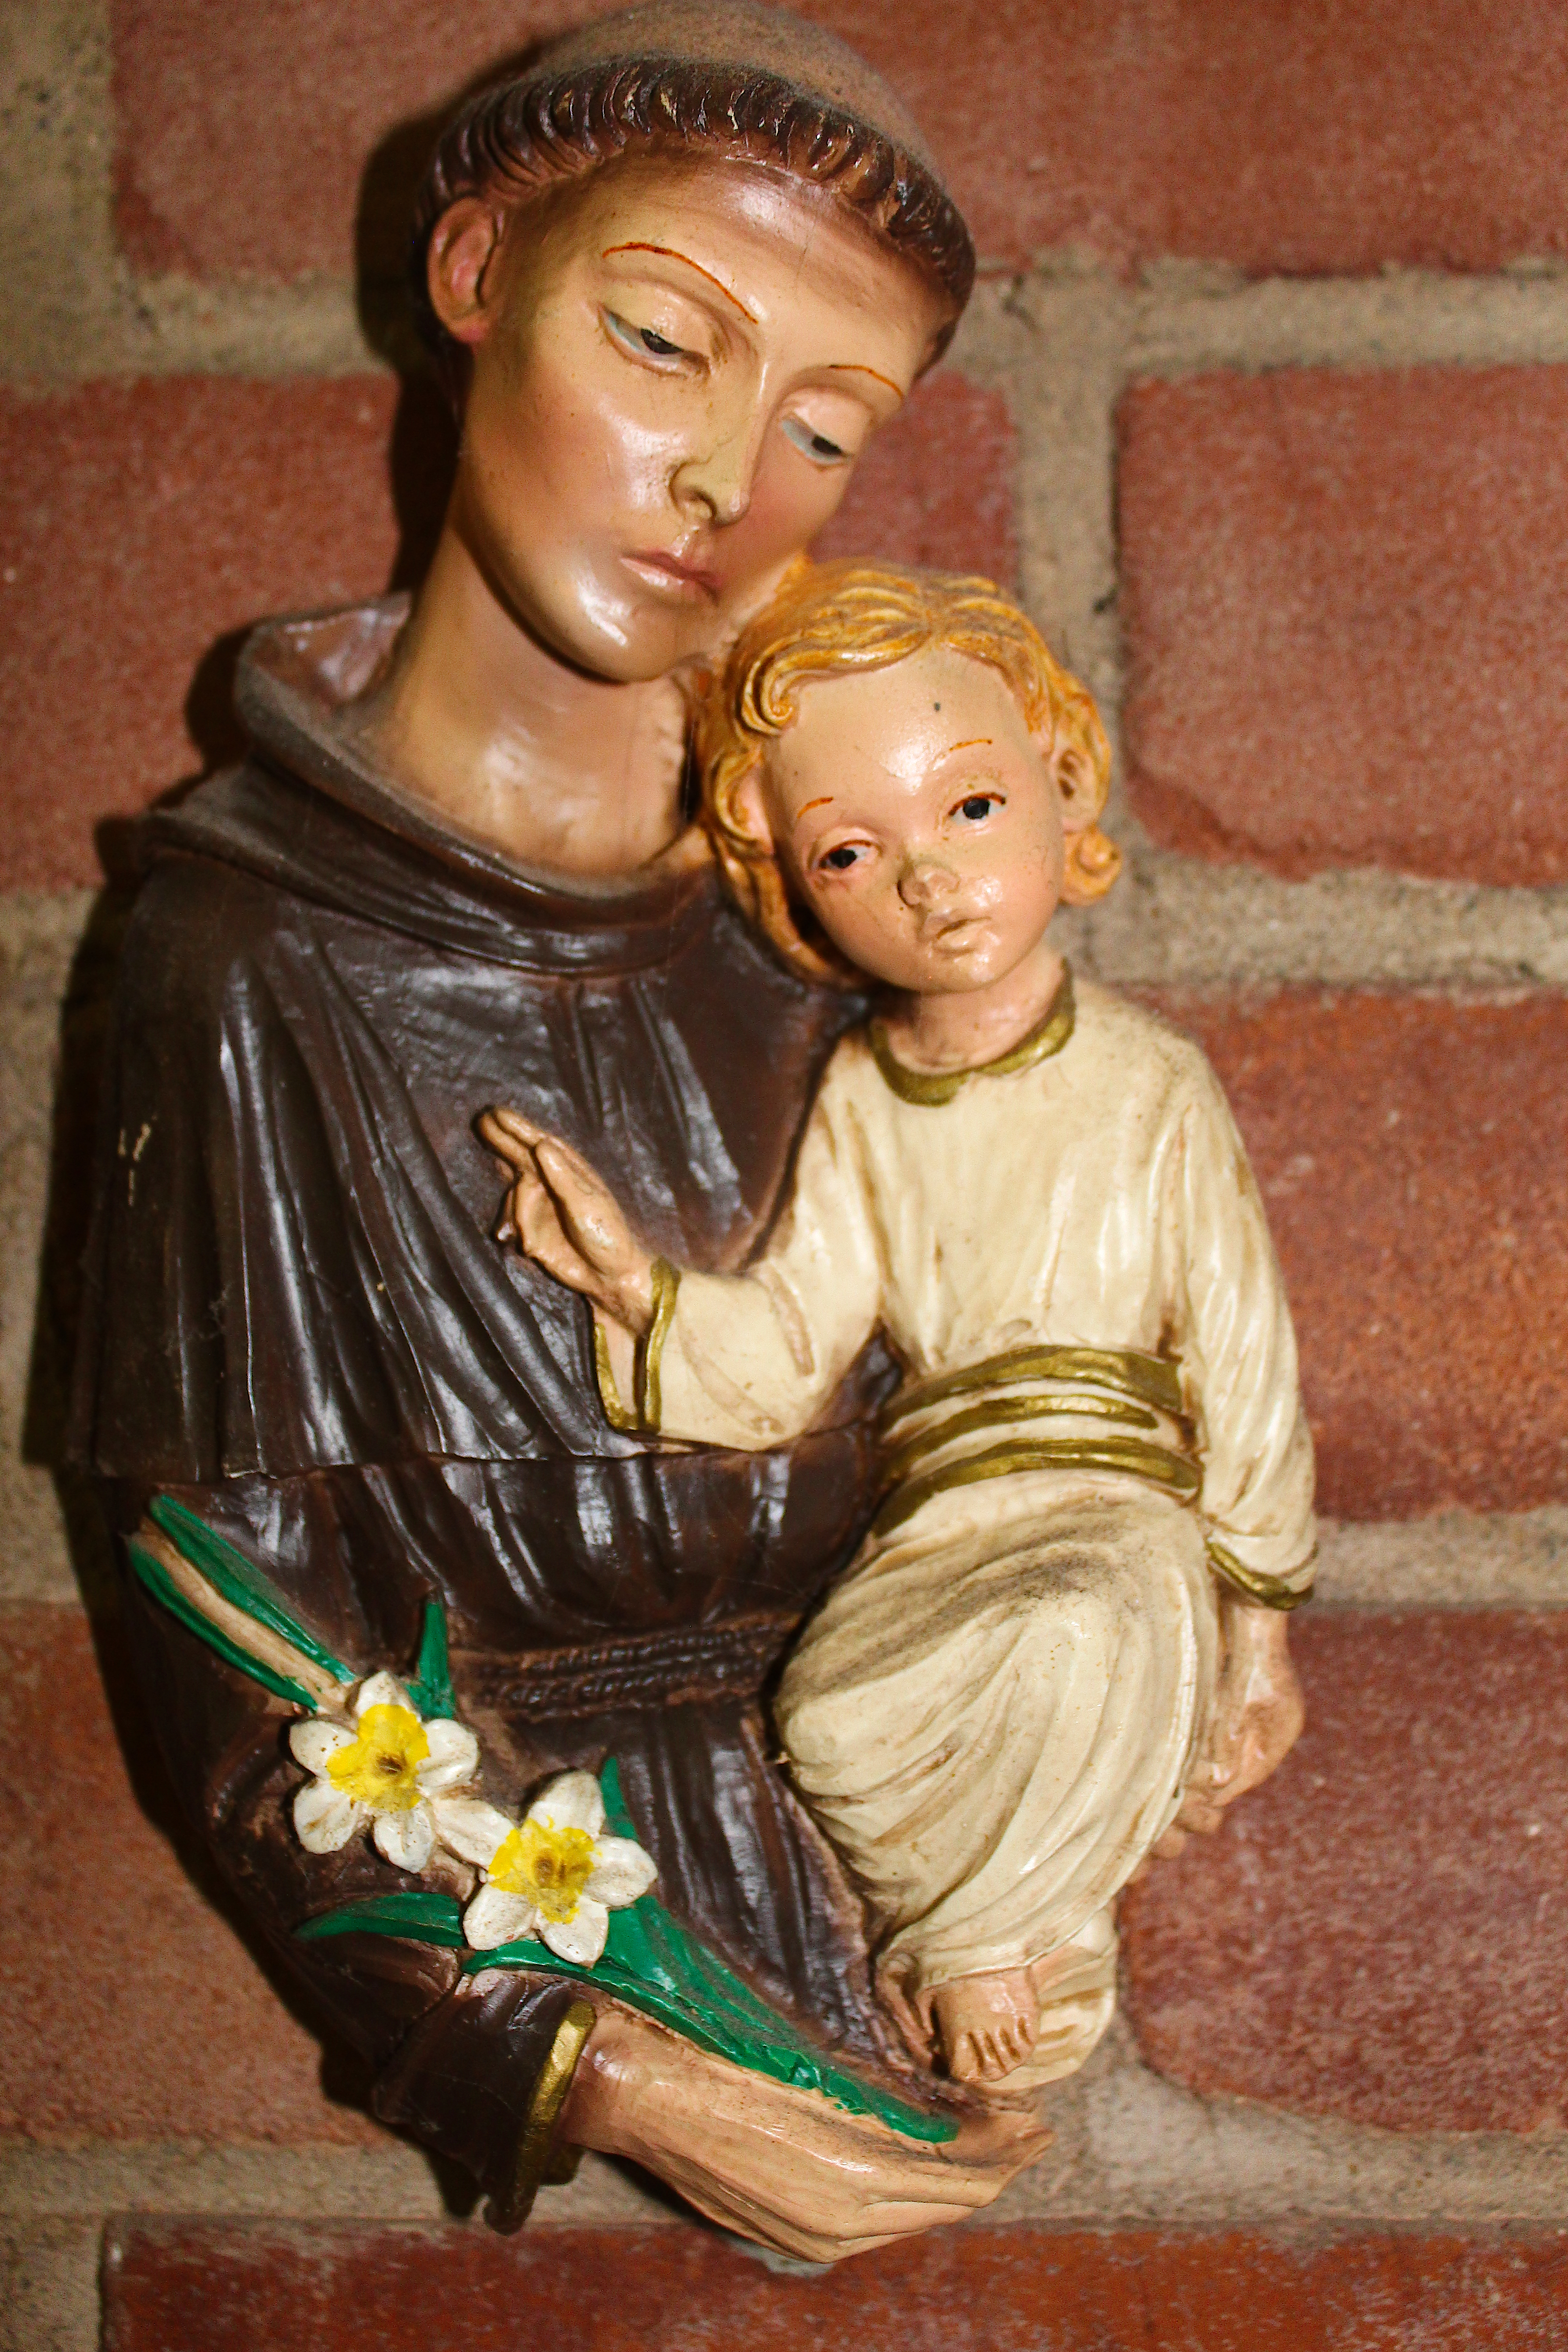 A small wall mounted hanging statur of St. Francis against a birck wall, holding daffodils and a baby Jesus